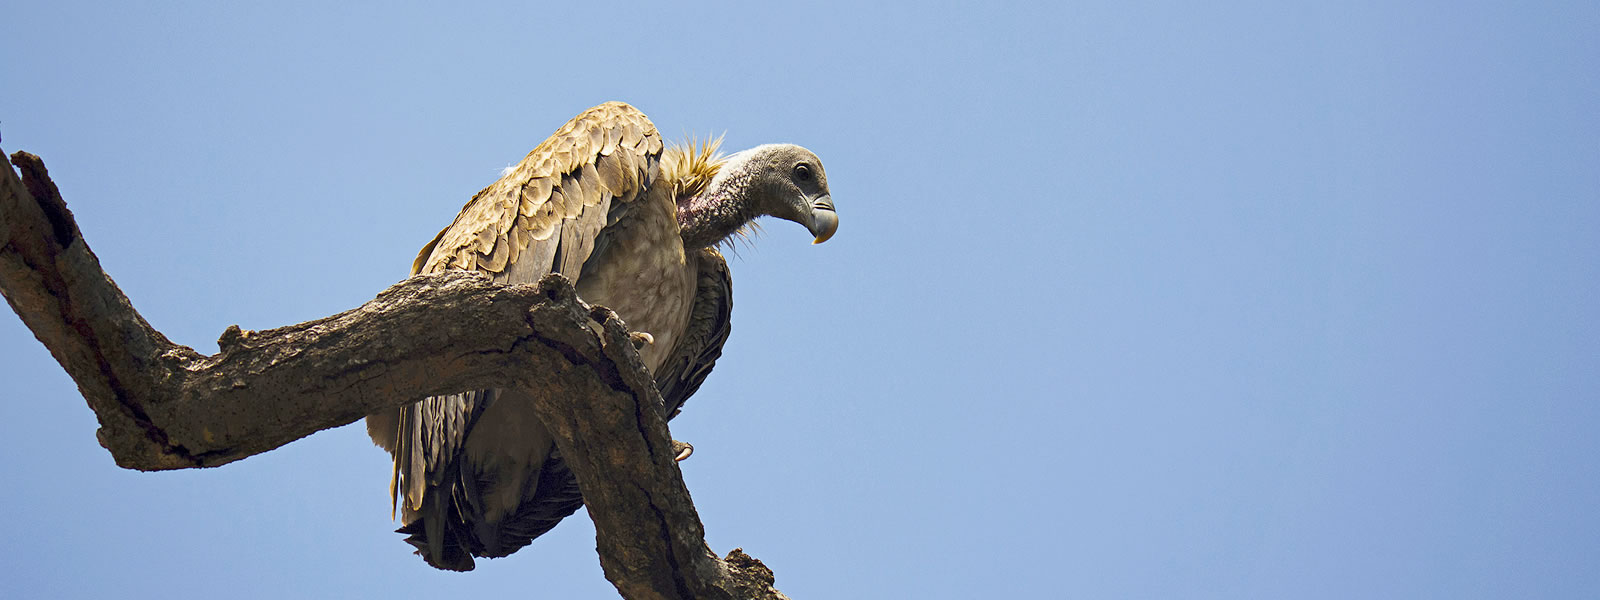 The Indian Vulture Gyps indicus perched on a bare tree branch